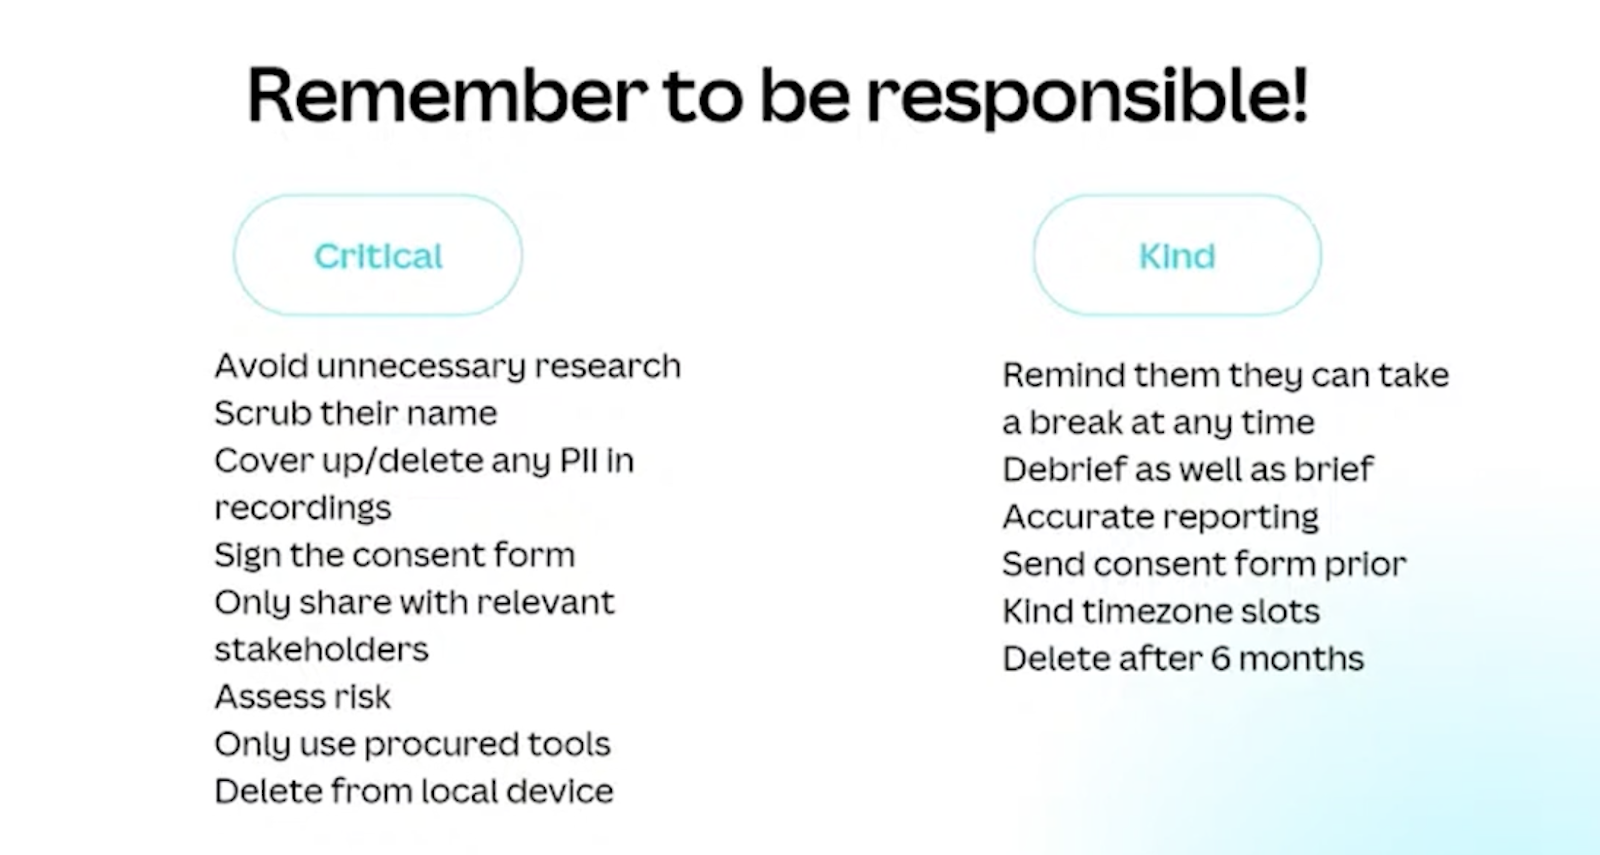 Remember to be responsible! It's critical to avoid unnecessary research, scrub their name, cover up/delete any PLL in recordings, Sign the consent form, only share with relevant stakeholders, assess risk, only use procured tools, delete from local device. Be kind - remind them they can take a break at any time, debrief as well as brief, accurate reporting, send consent form prior, kind timezone slots, delete after 6 months. 